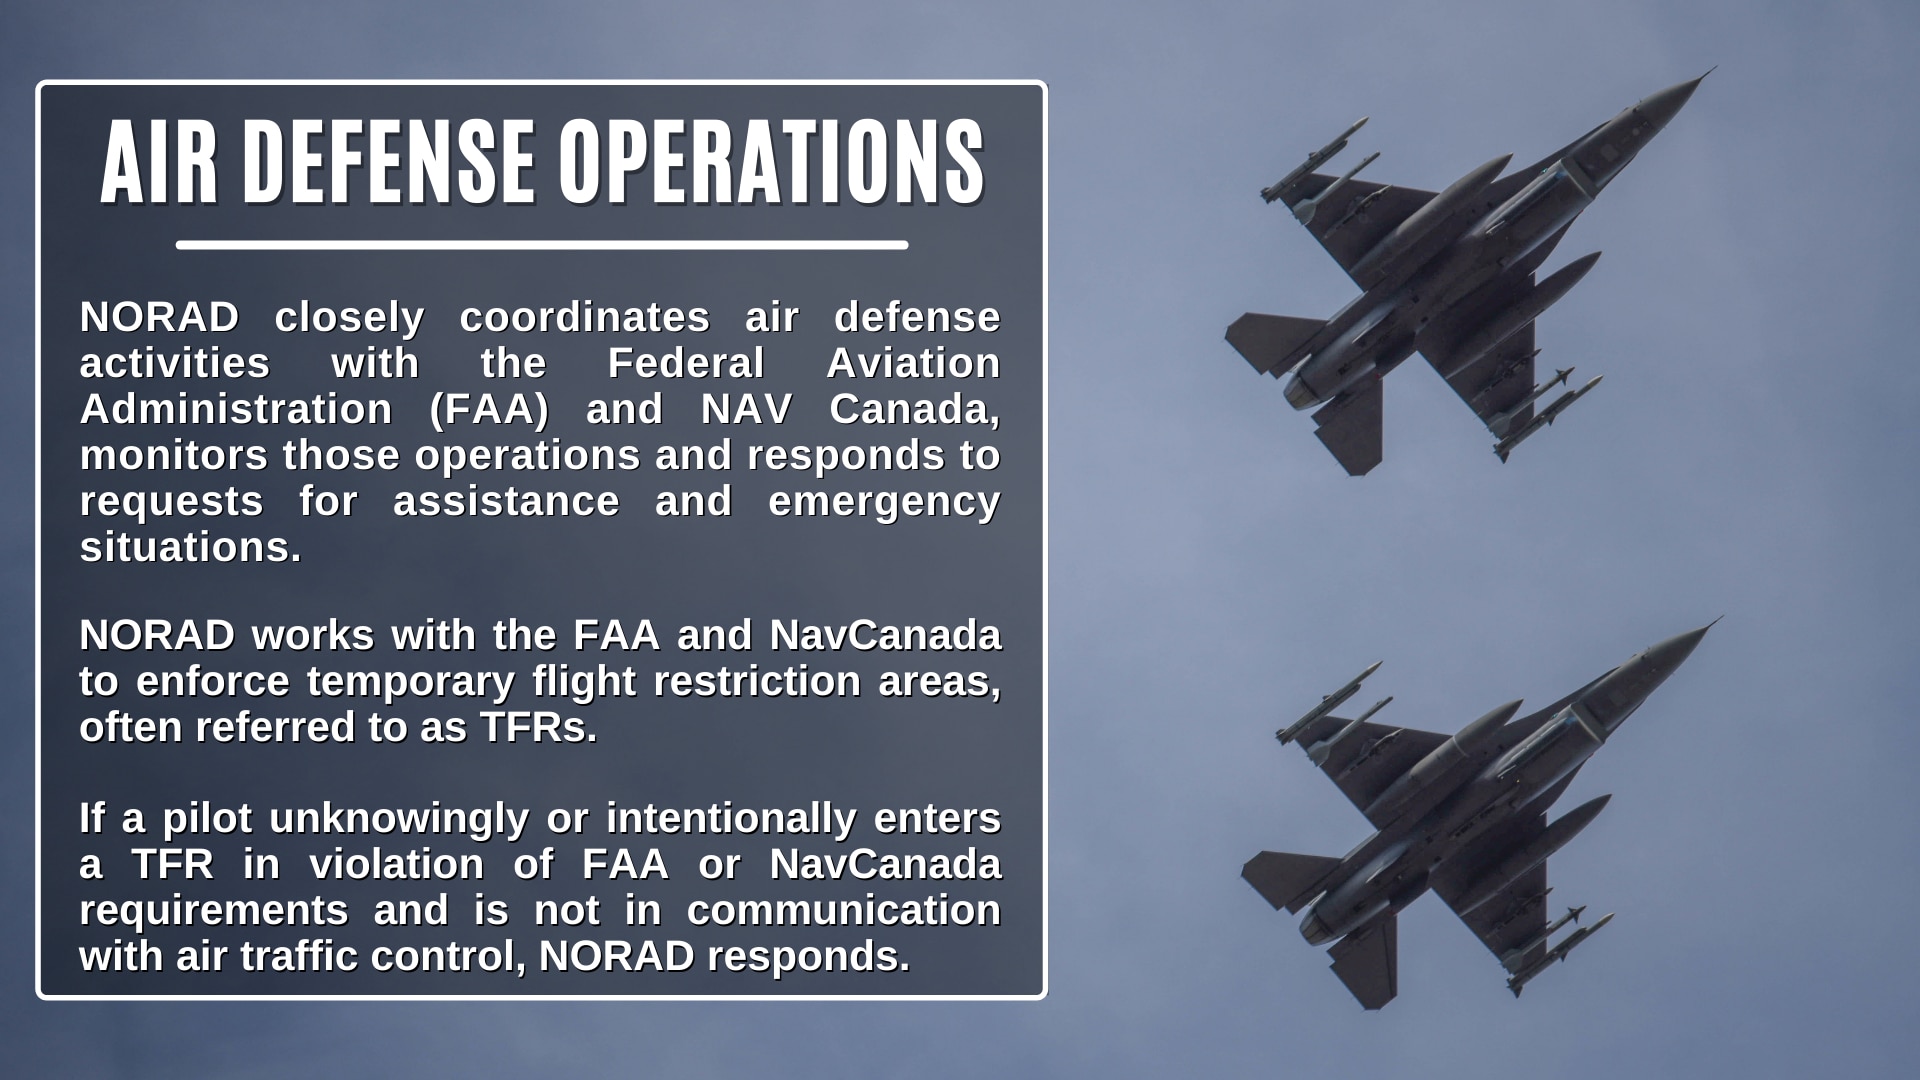 Operation Noble Eagle infographic